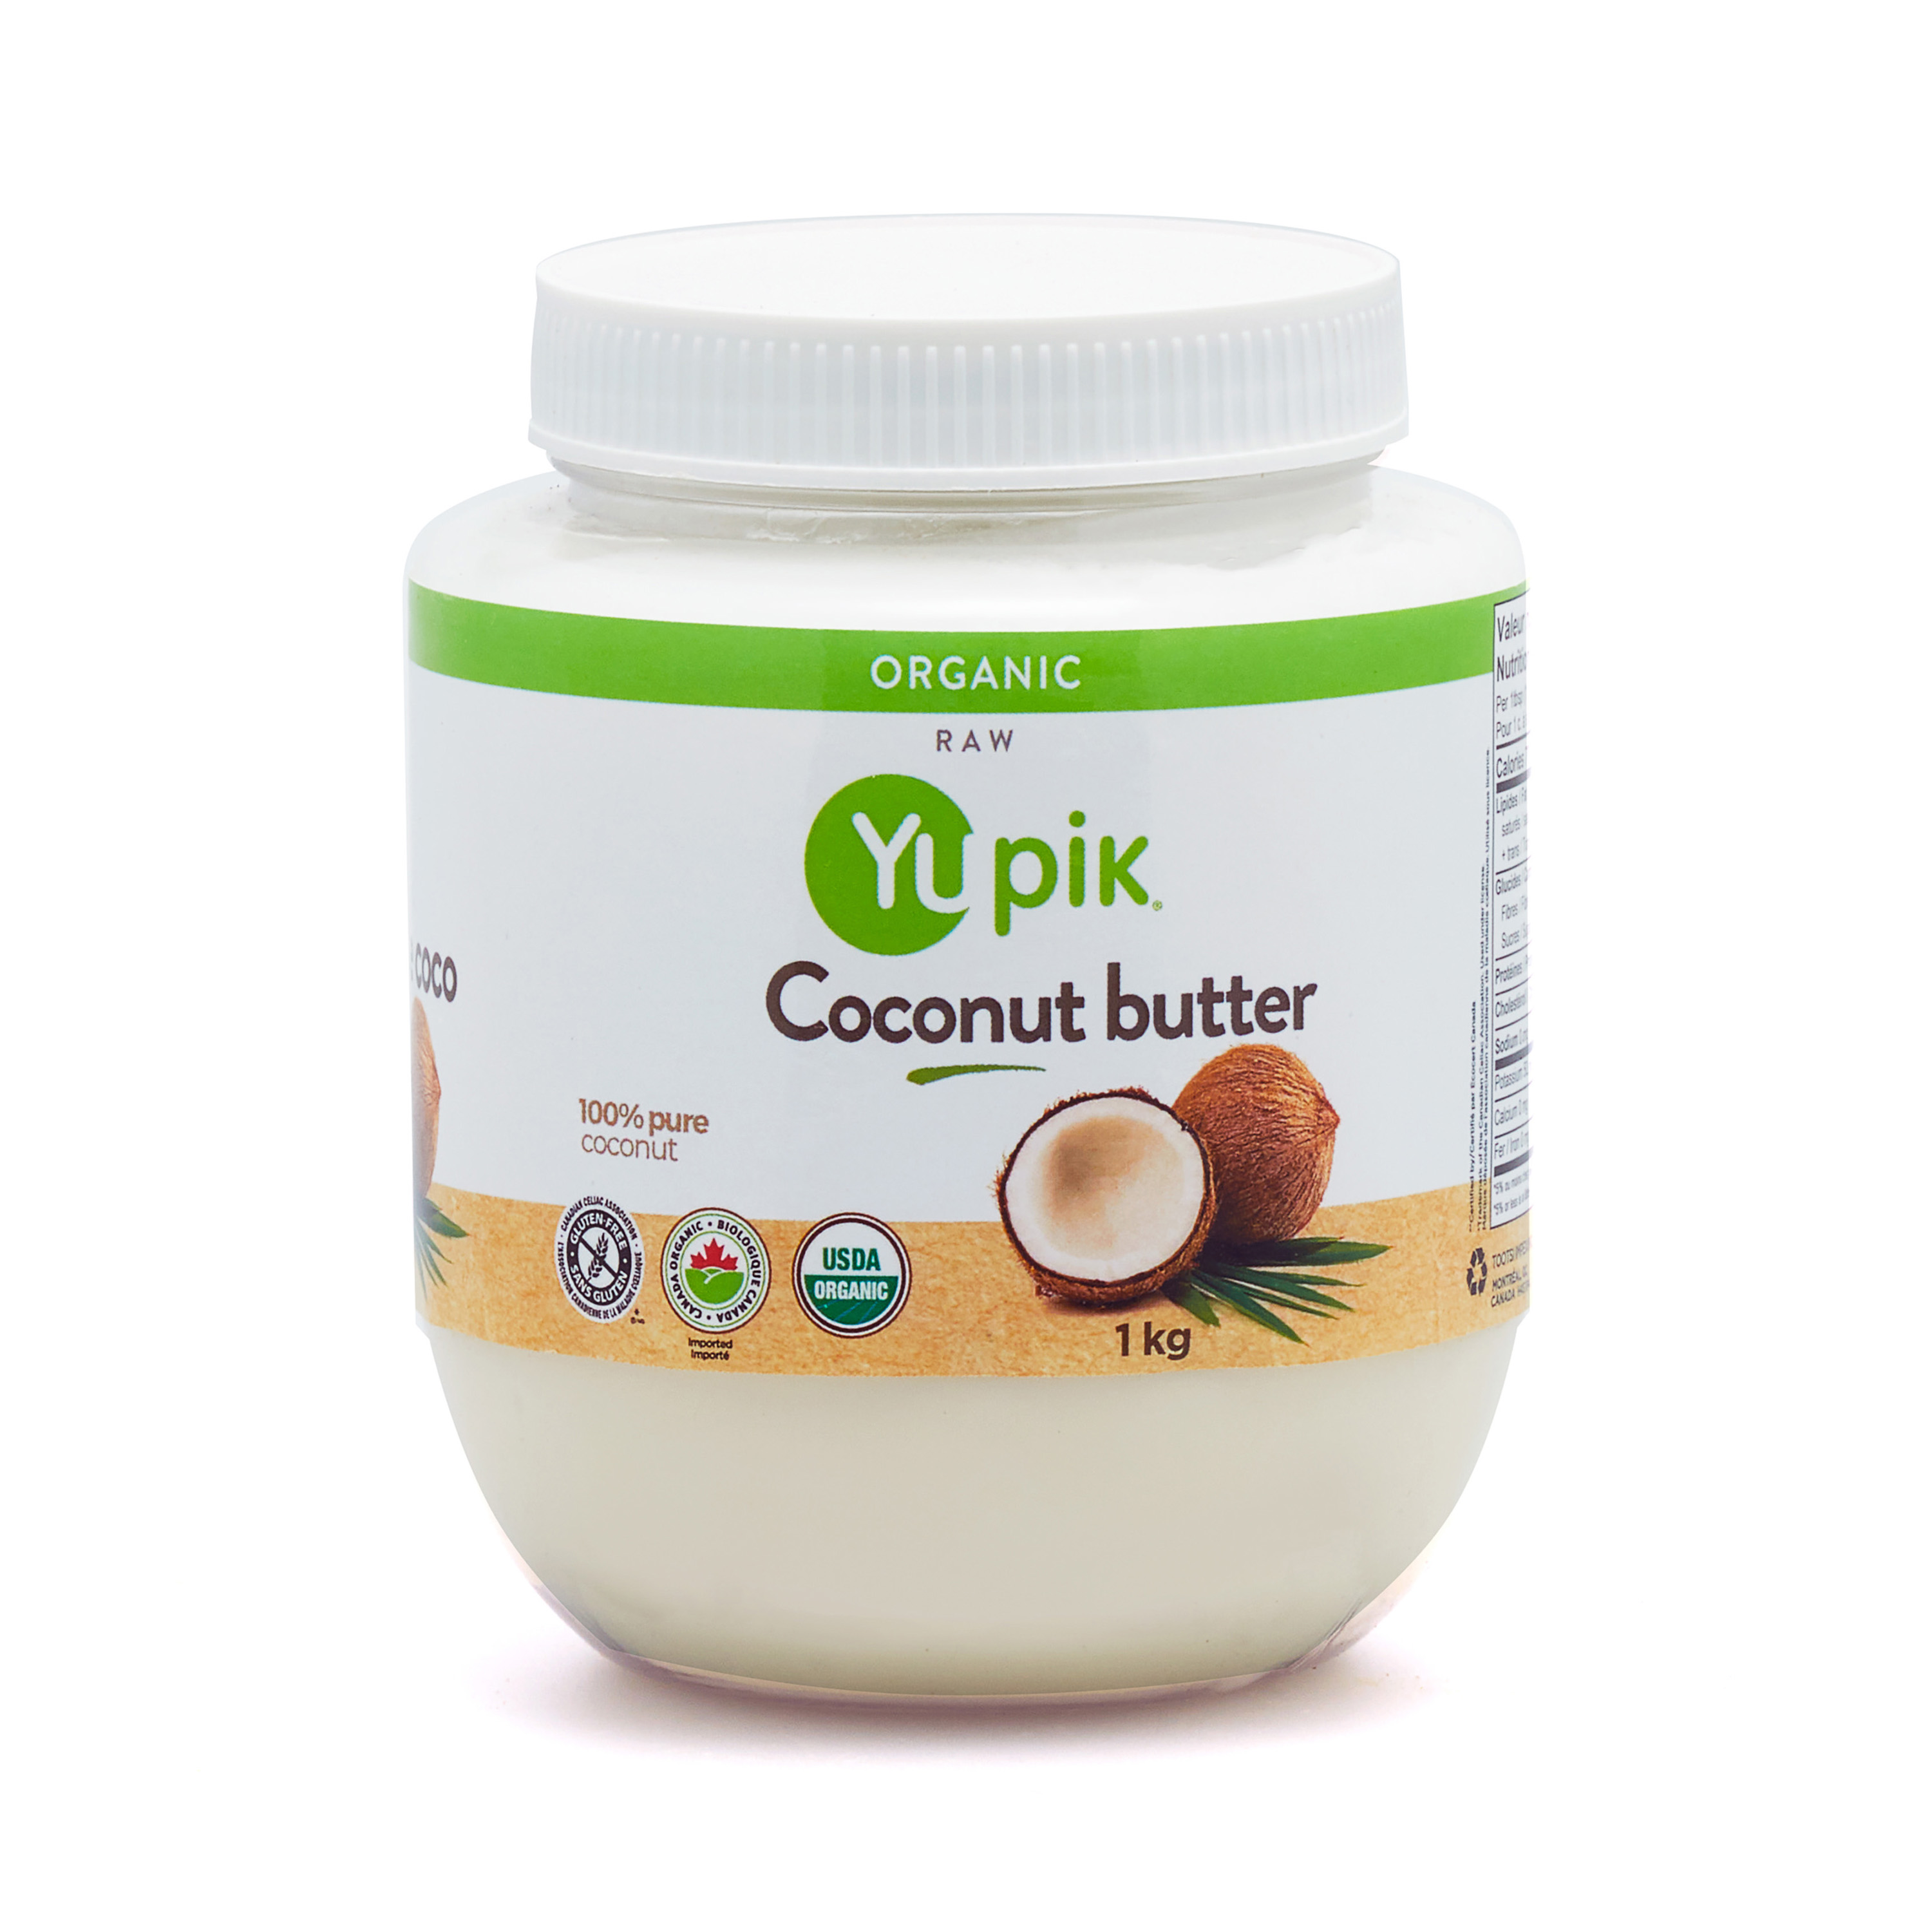 Organic Coconut butter